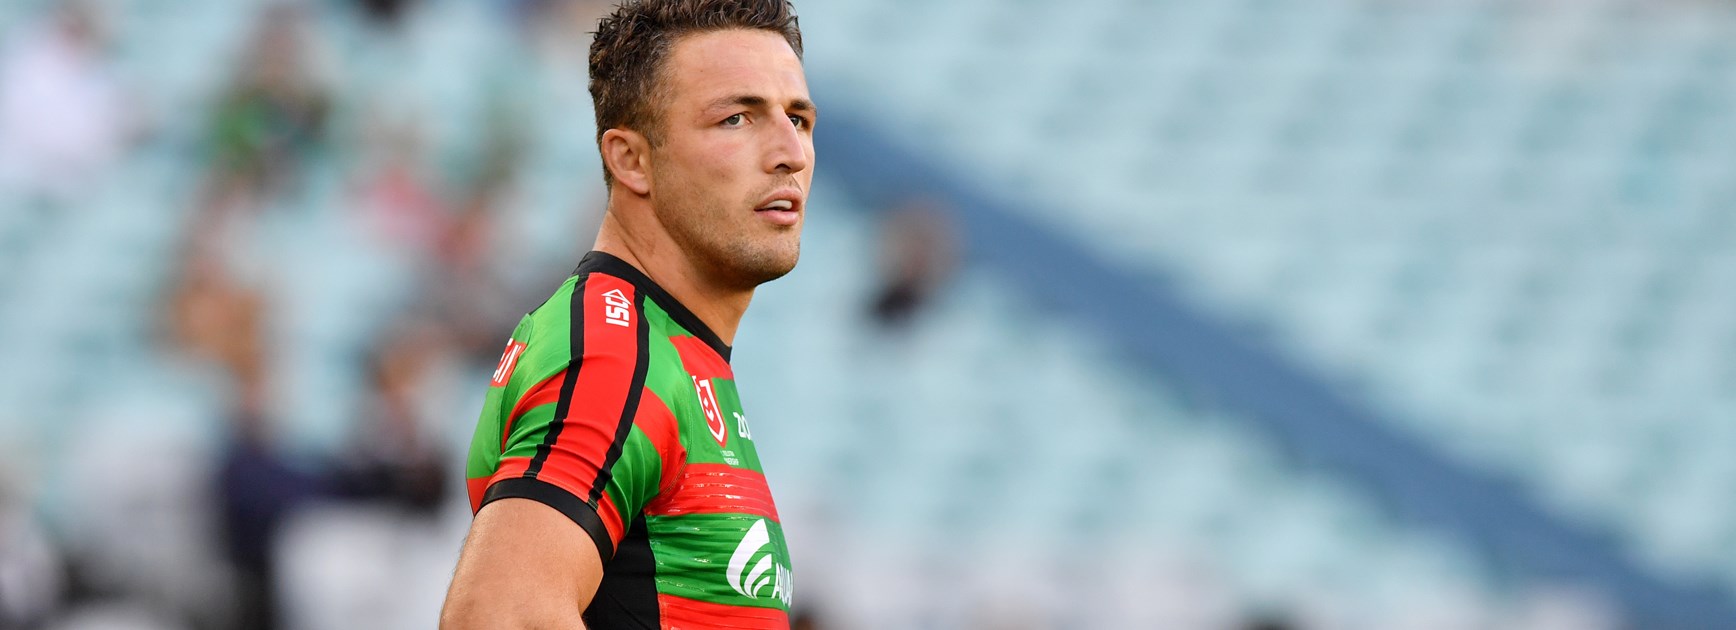 Bennett unfazed by absence of Burgess and Burns